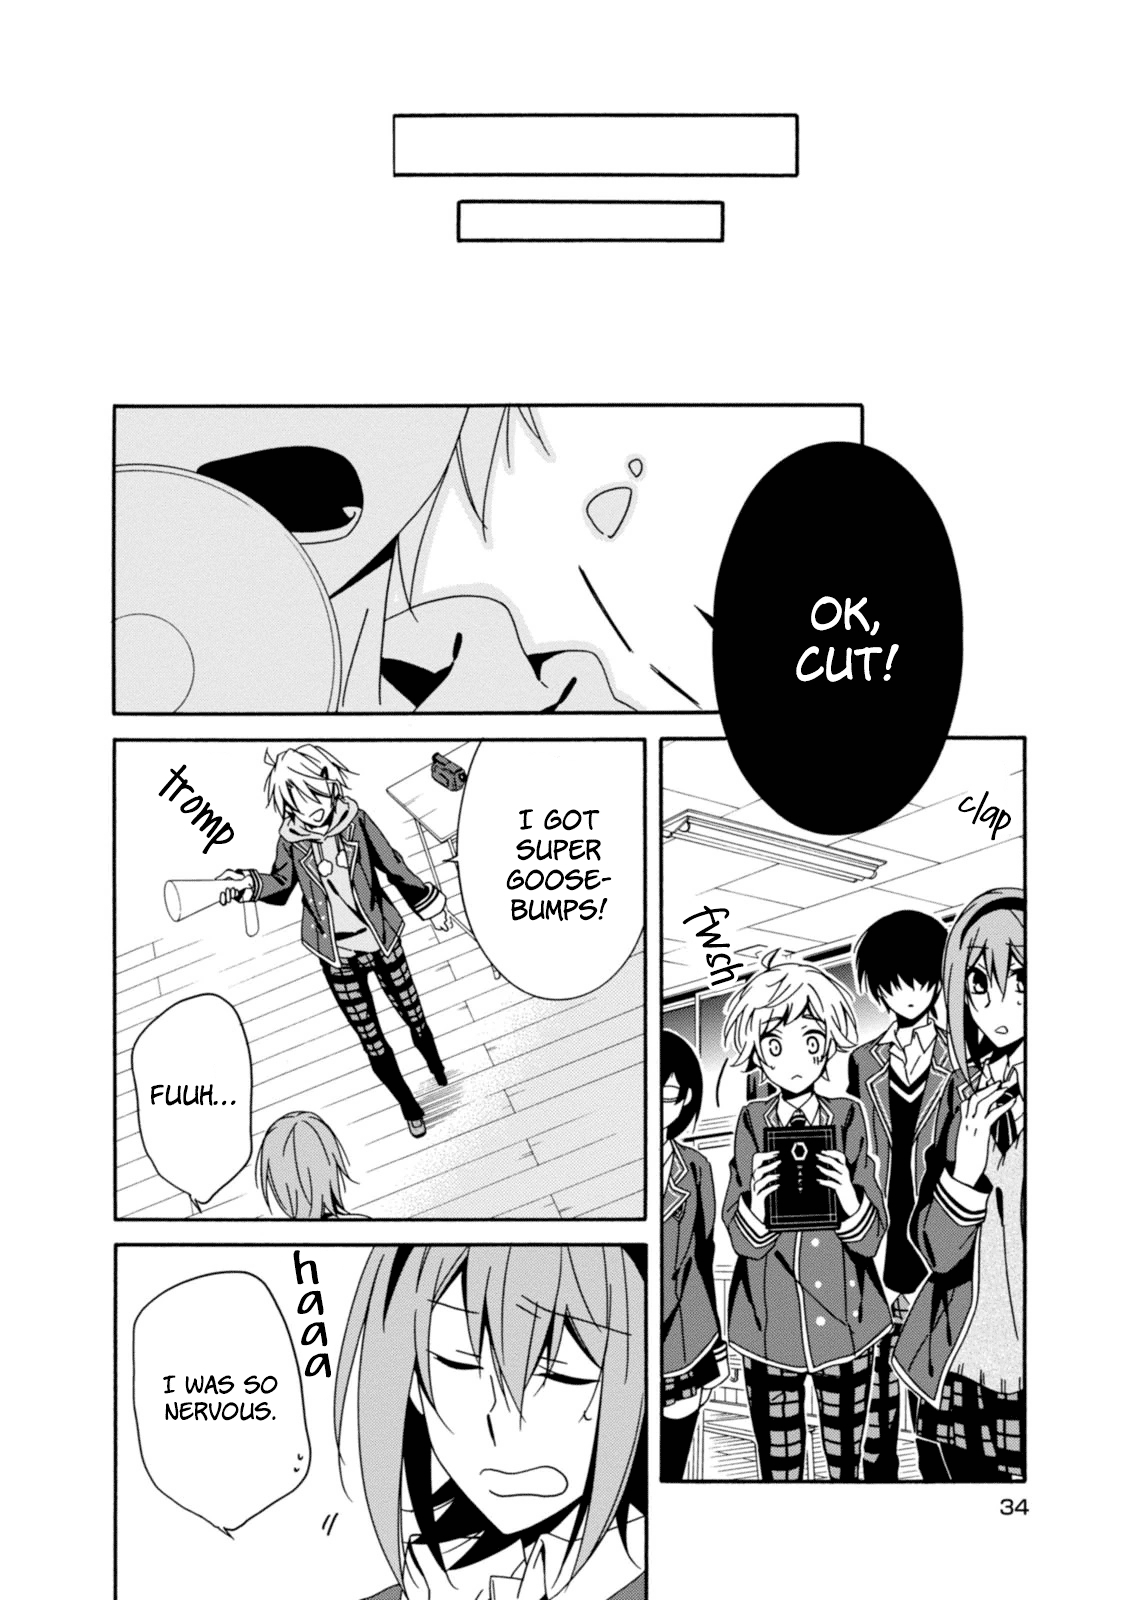 Shuuen no Shiori Vol. 7 Ch. 29 Schrödinger's Cat is Crying There